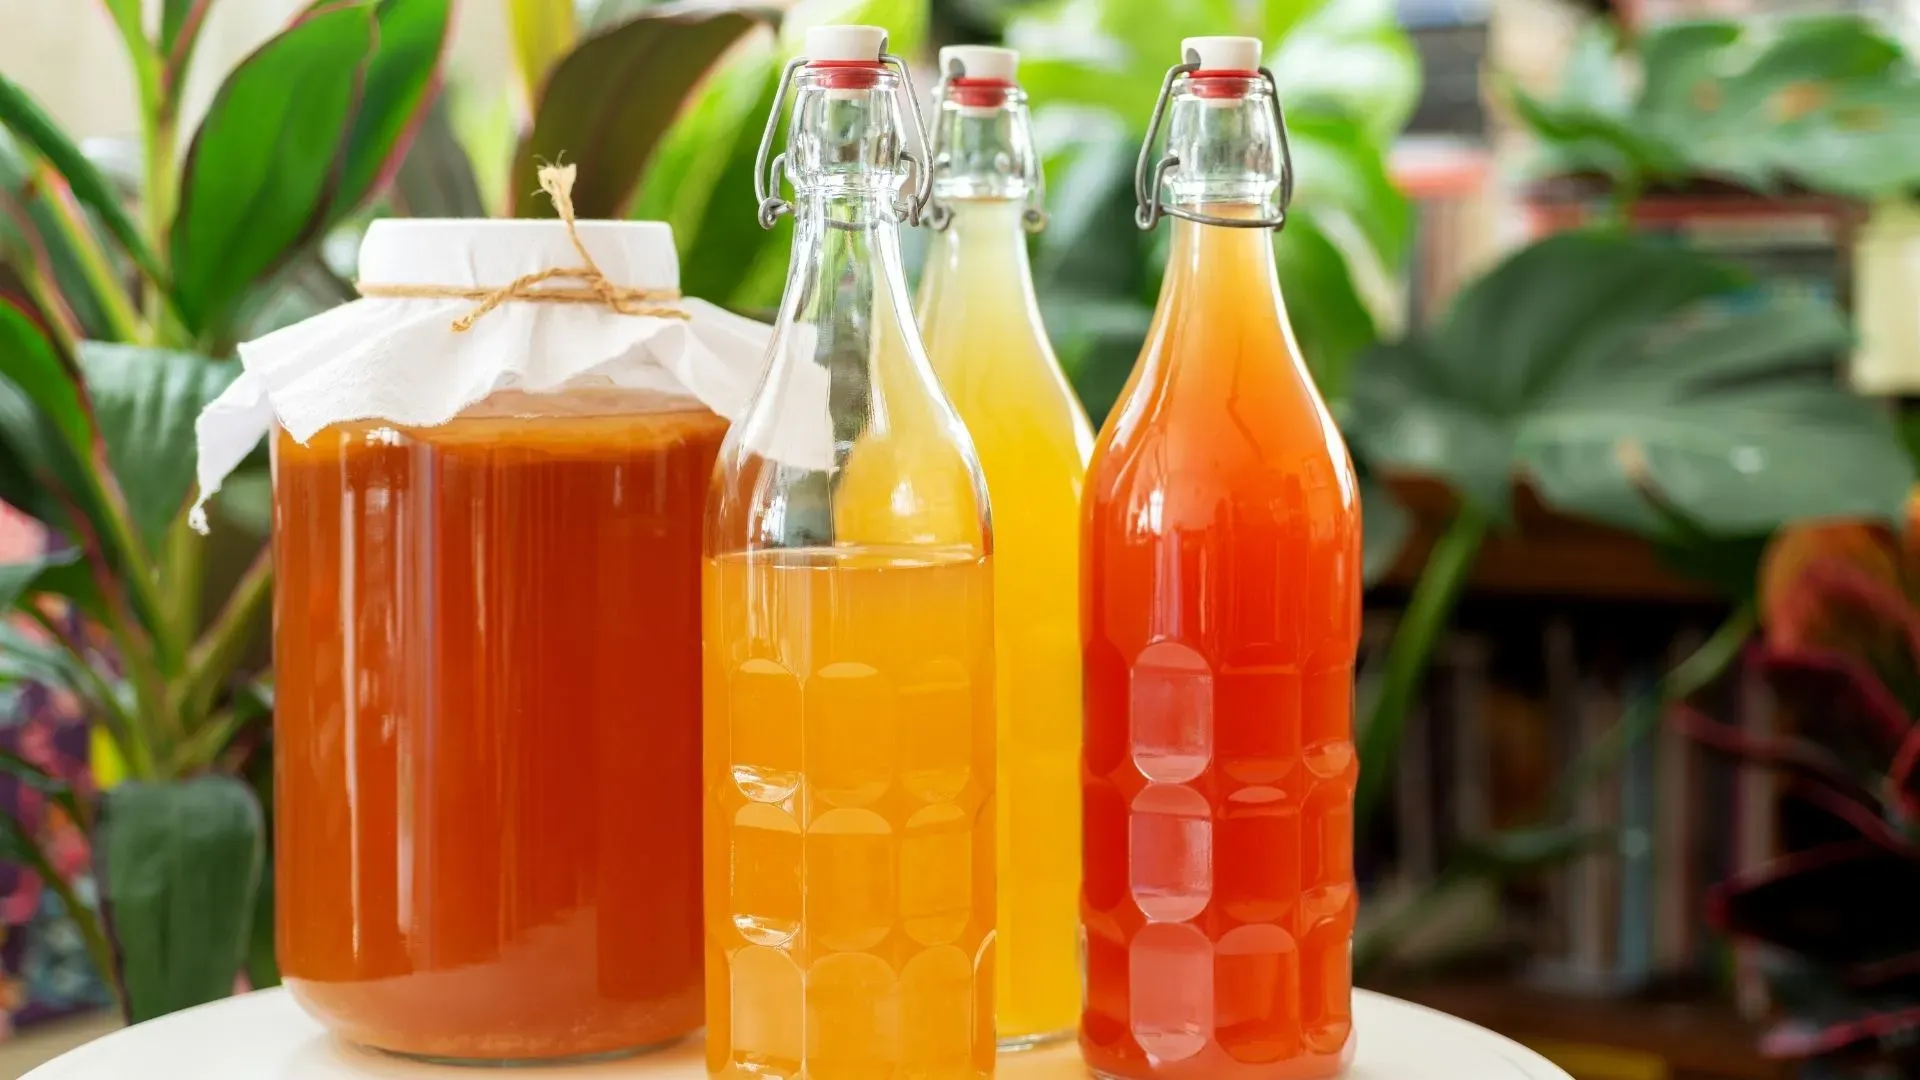 You can prepare kombucha at home in small batches